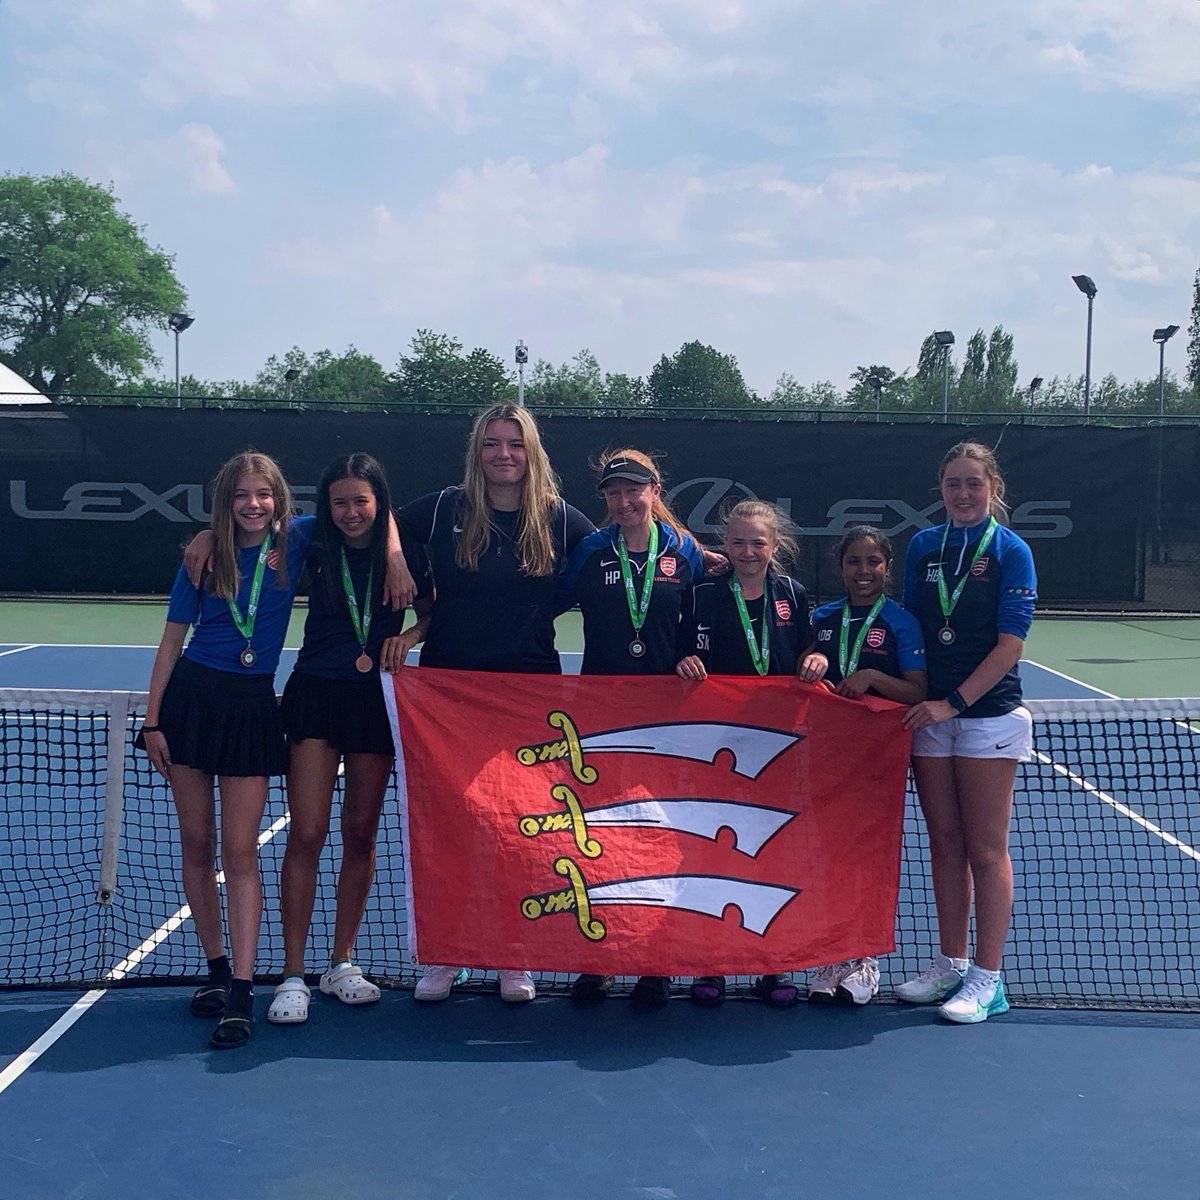 A real joy to work with this group of girls over the past few days. From the qualifying stage a couple of weeks ago to a 3rd place finish at the 14U County Cup National Finals 🥉 @LTACompetitions